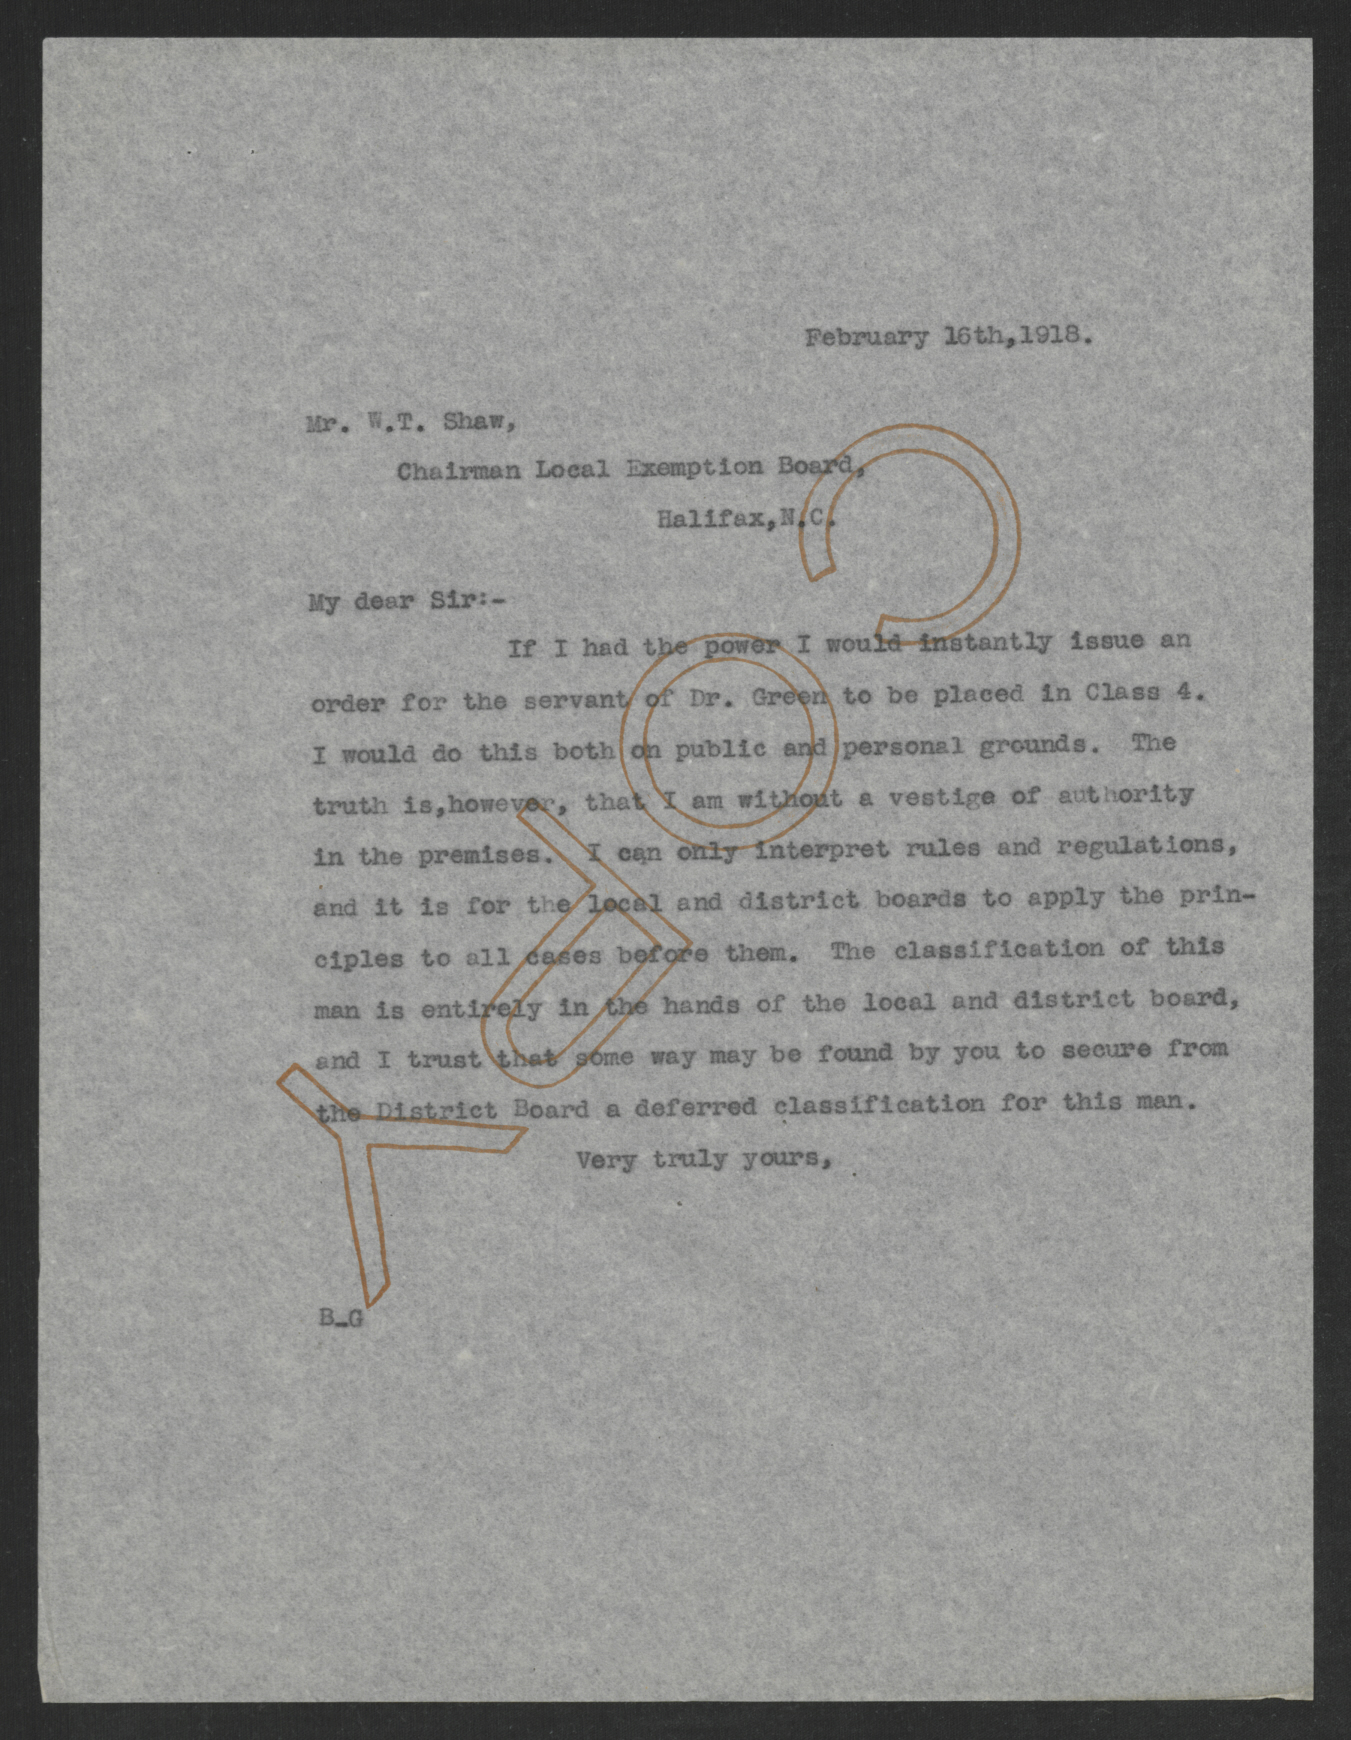 Letter from Thomas W. Bickett to William T. Shaw, February 16, 1918